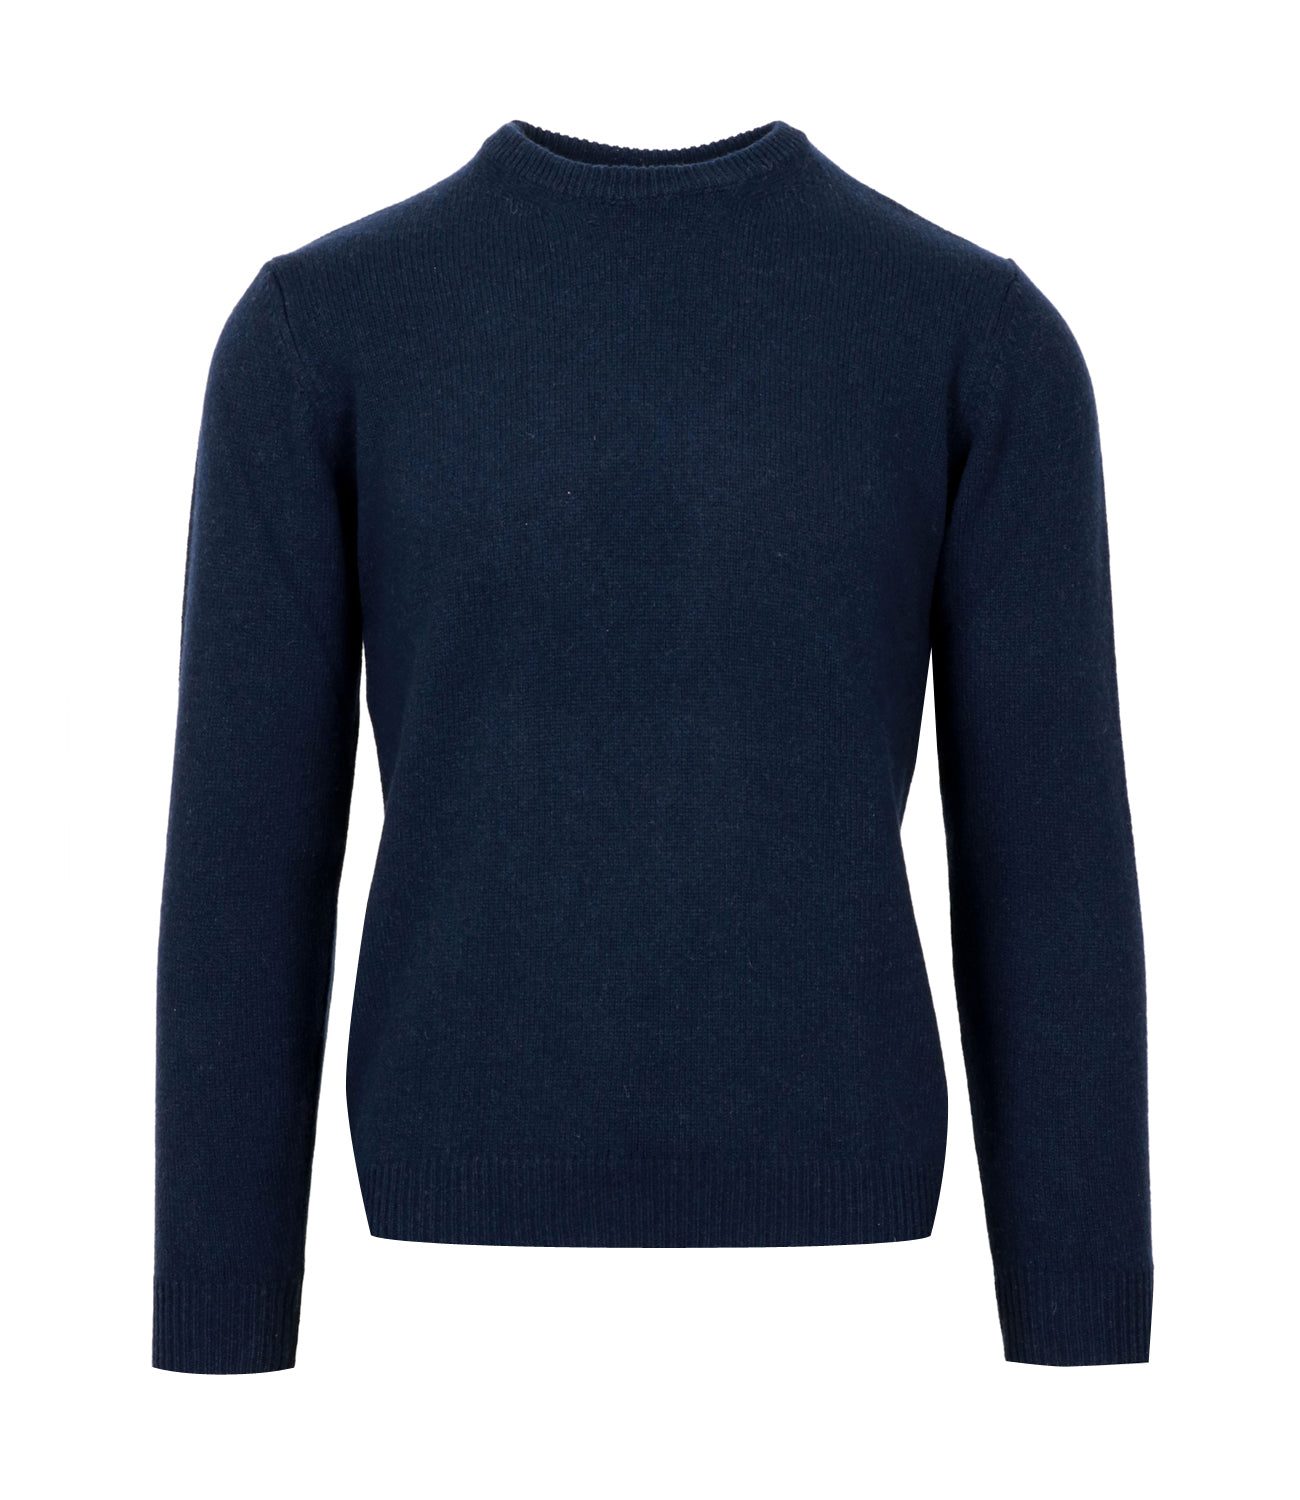 King Cashmere | Navy Blue Sweater